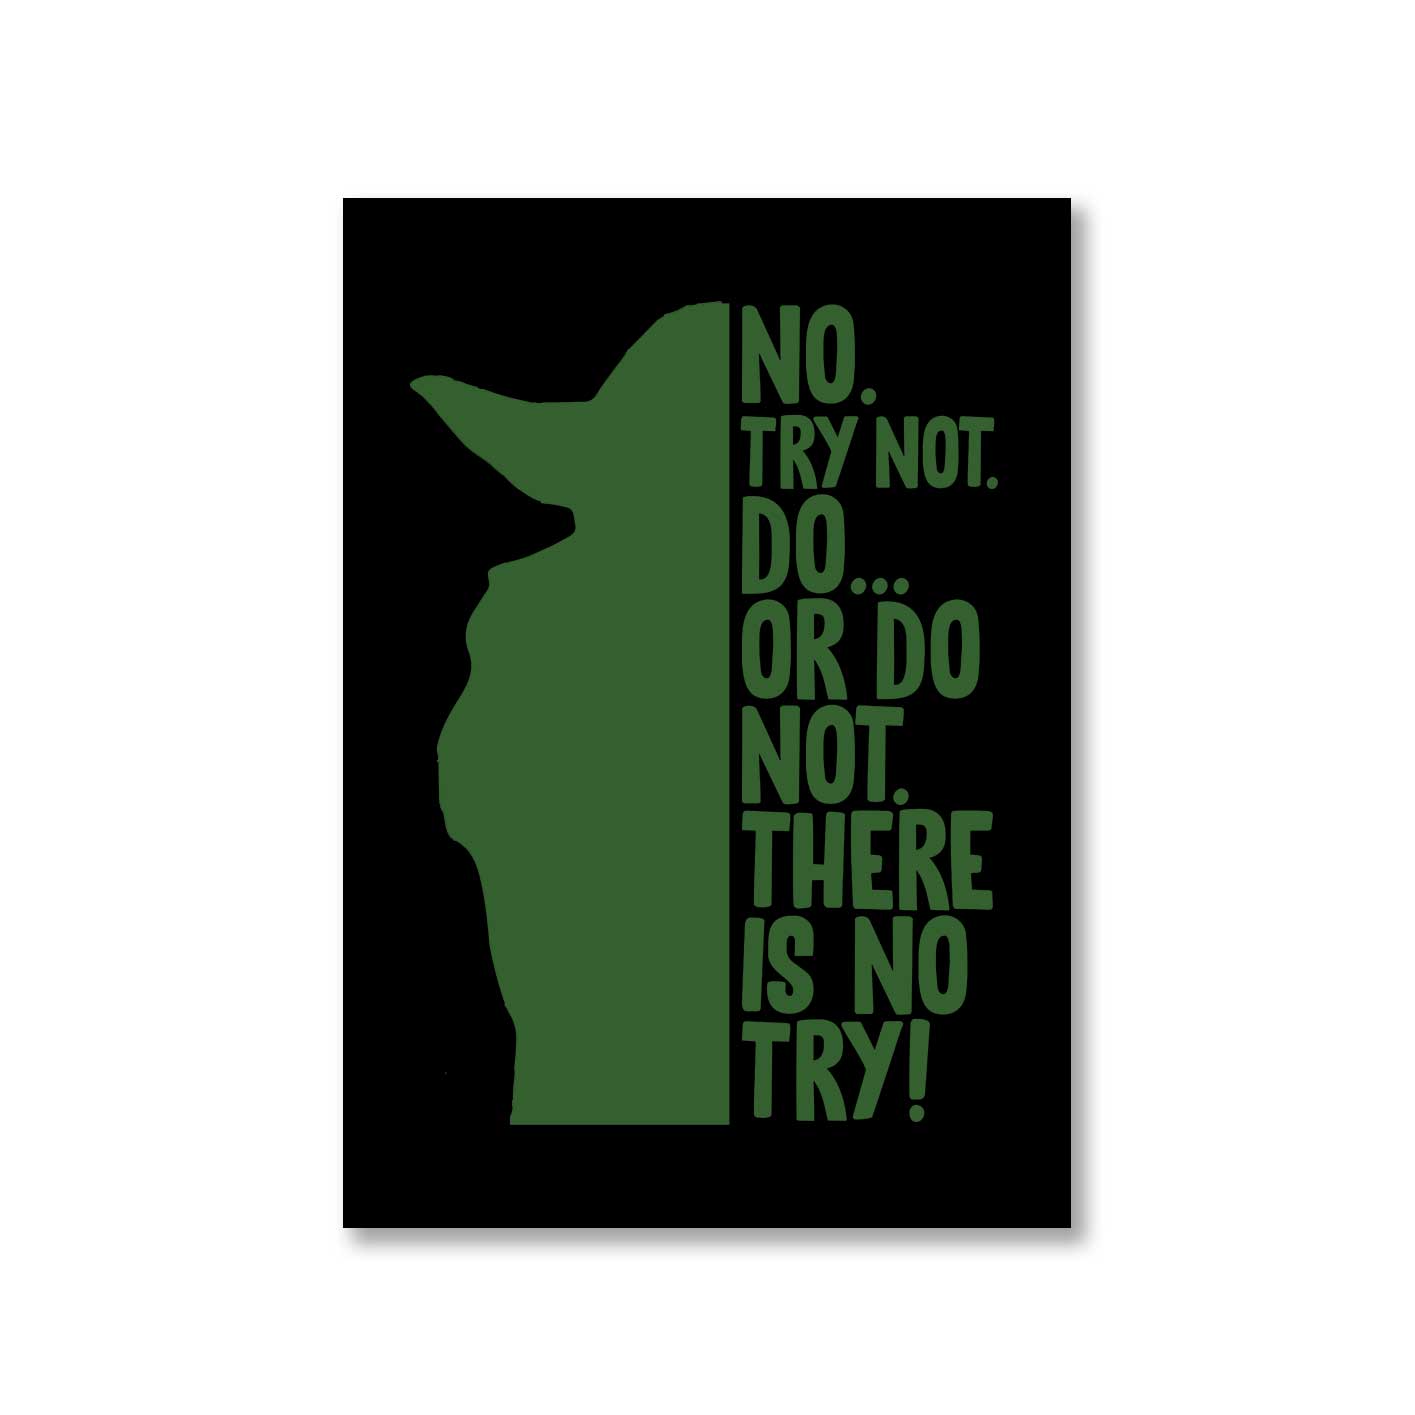 star wars there is no try poster wall art buy online united states of america usa the banyan tee tbt a4 yoda